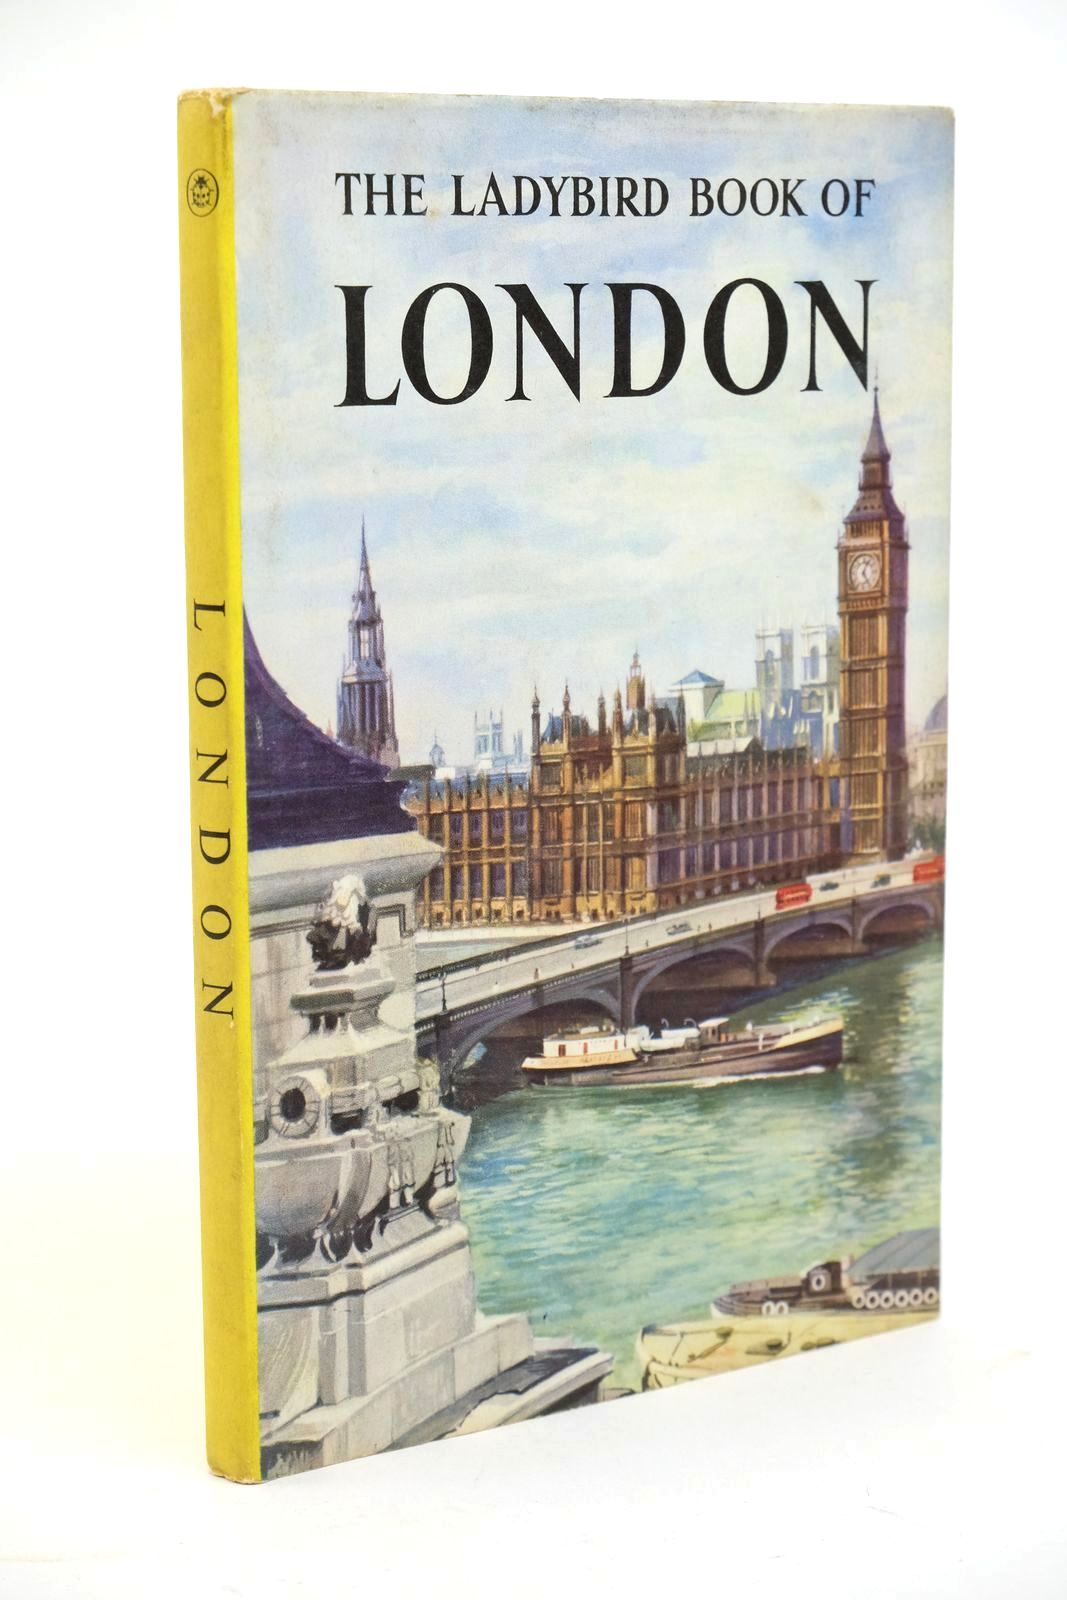 Photo of THE LADYBIRD BOOK OF LONDON written by Lewesdon, John illustrated by Berry, John published by Wills & Hepworth Ltd. (STOCK CODE: 1323150)  for sale by Stella & Rose's Books